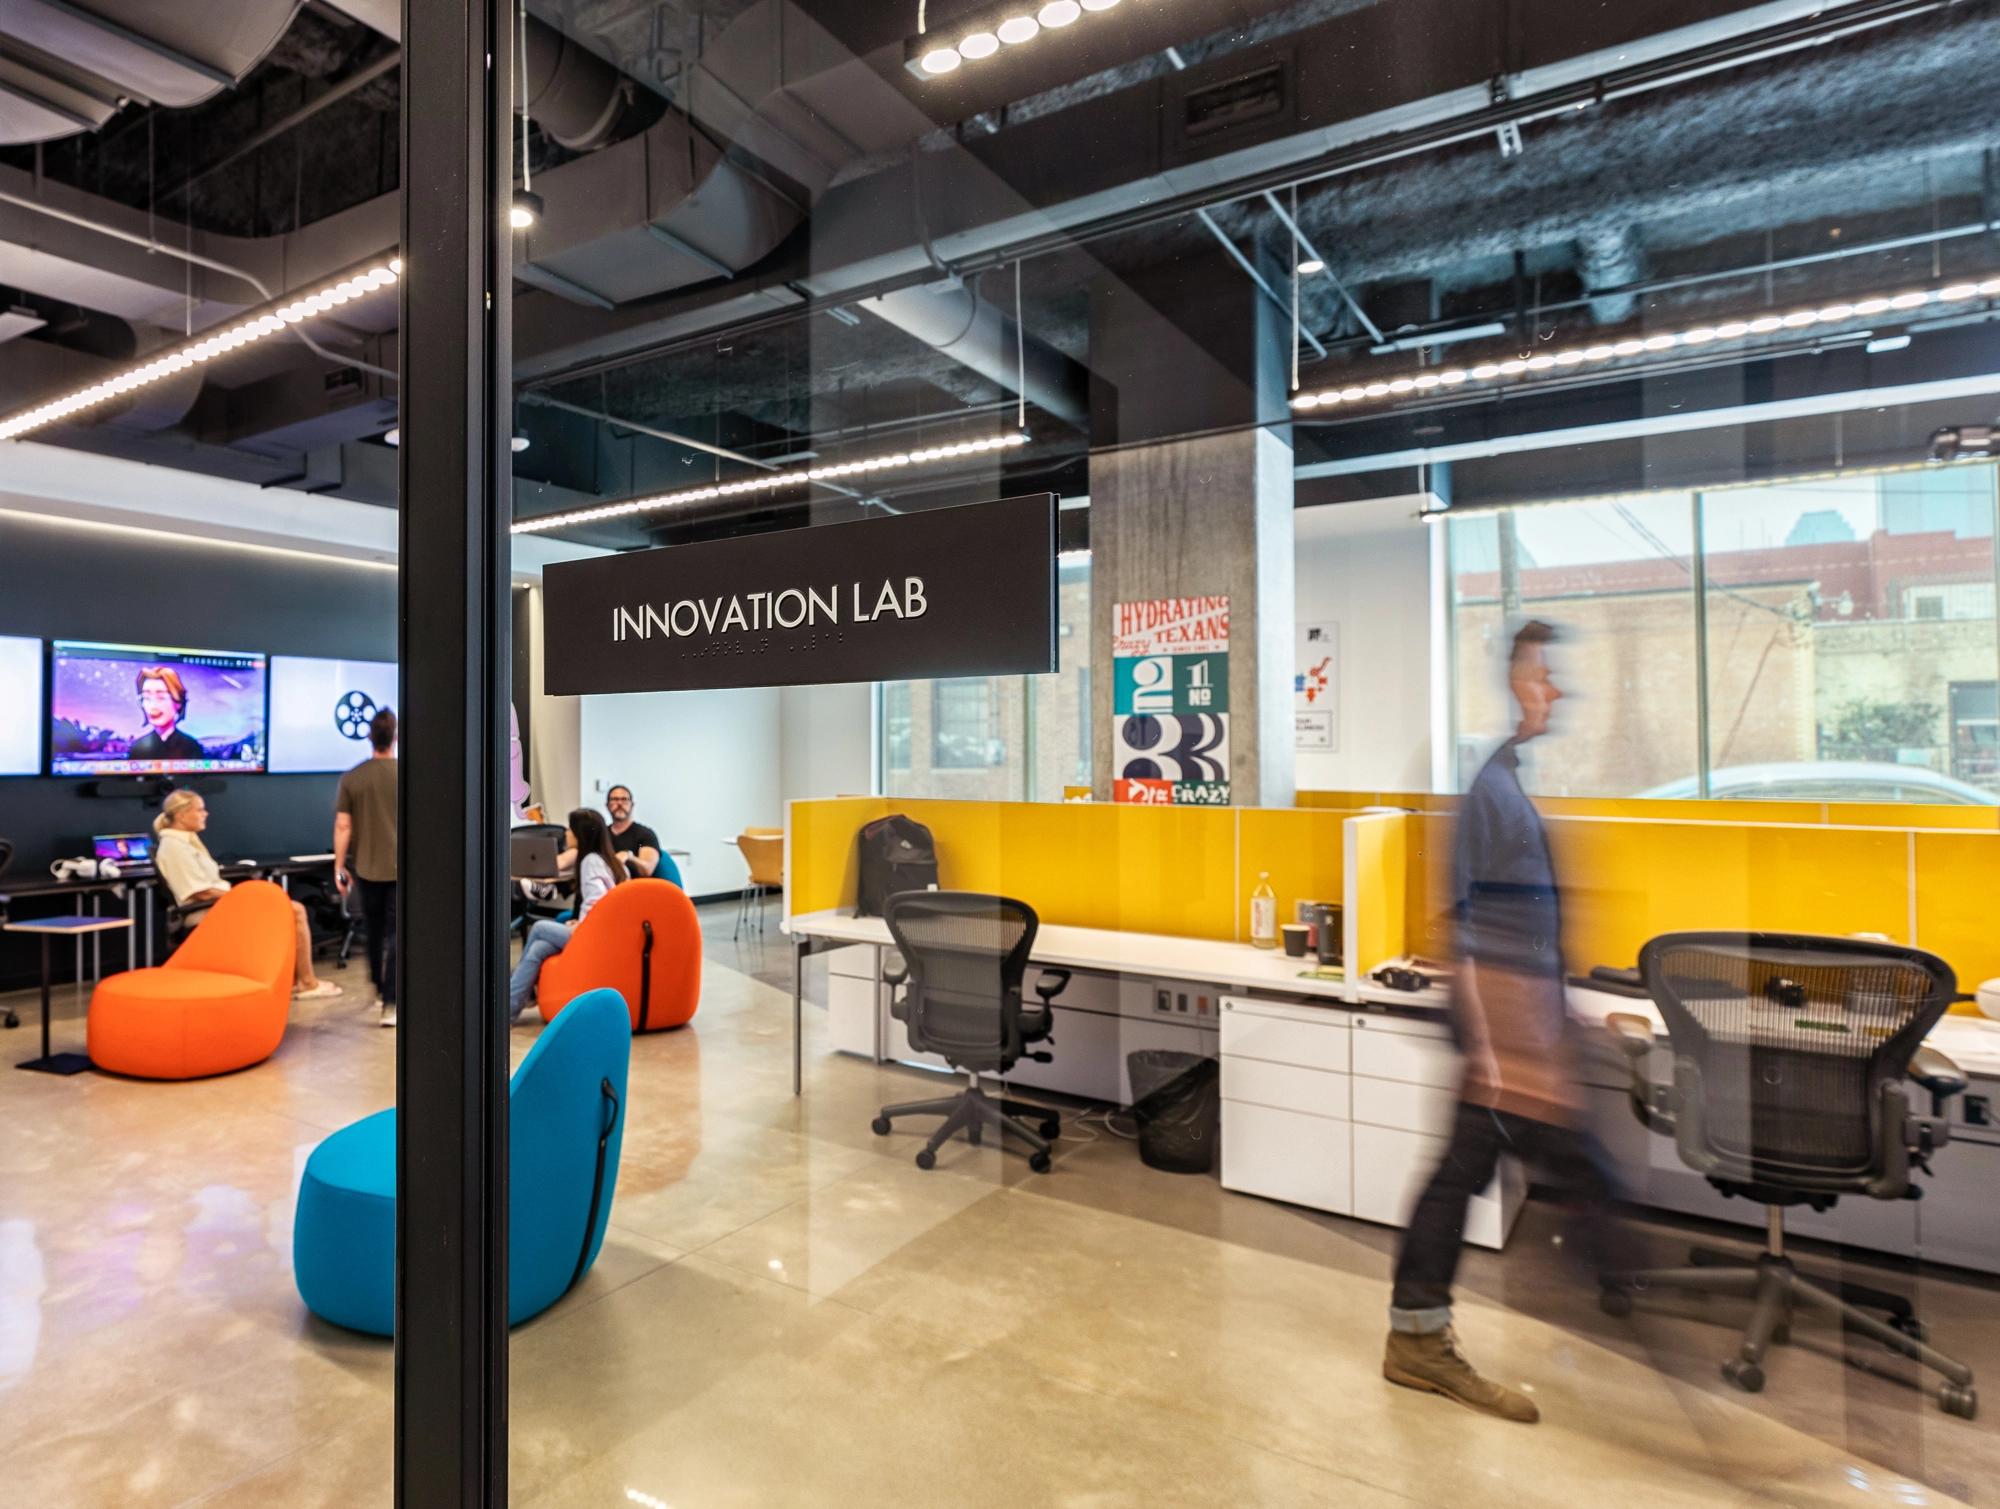 The TRG Innovation Lab